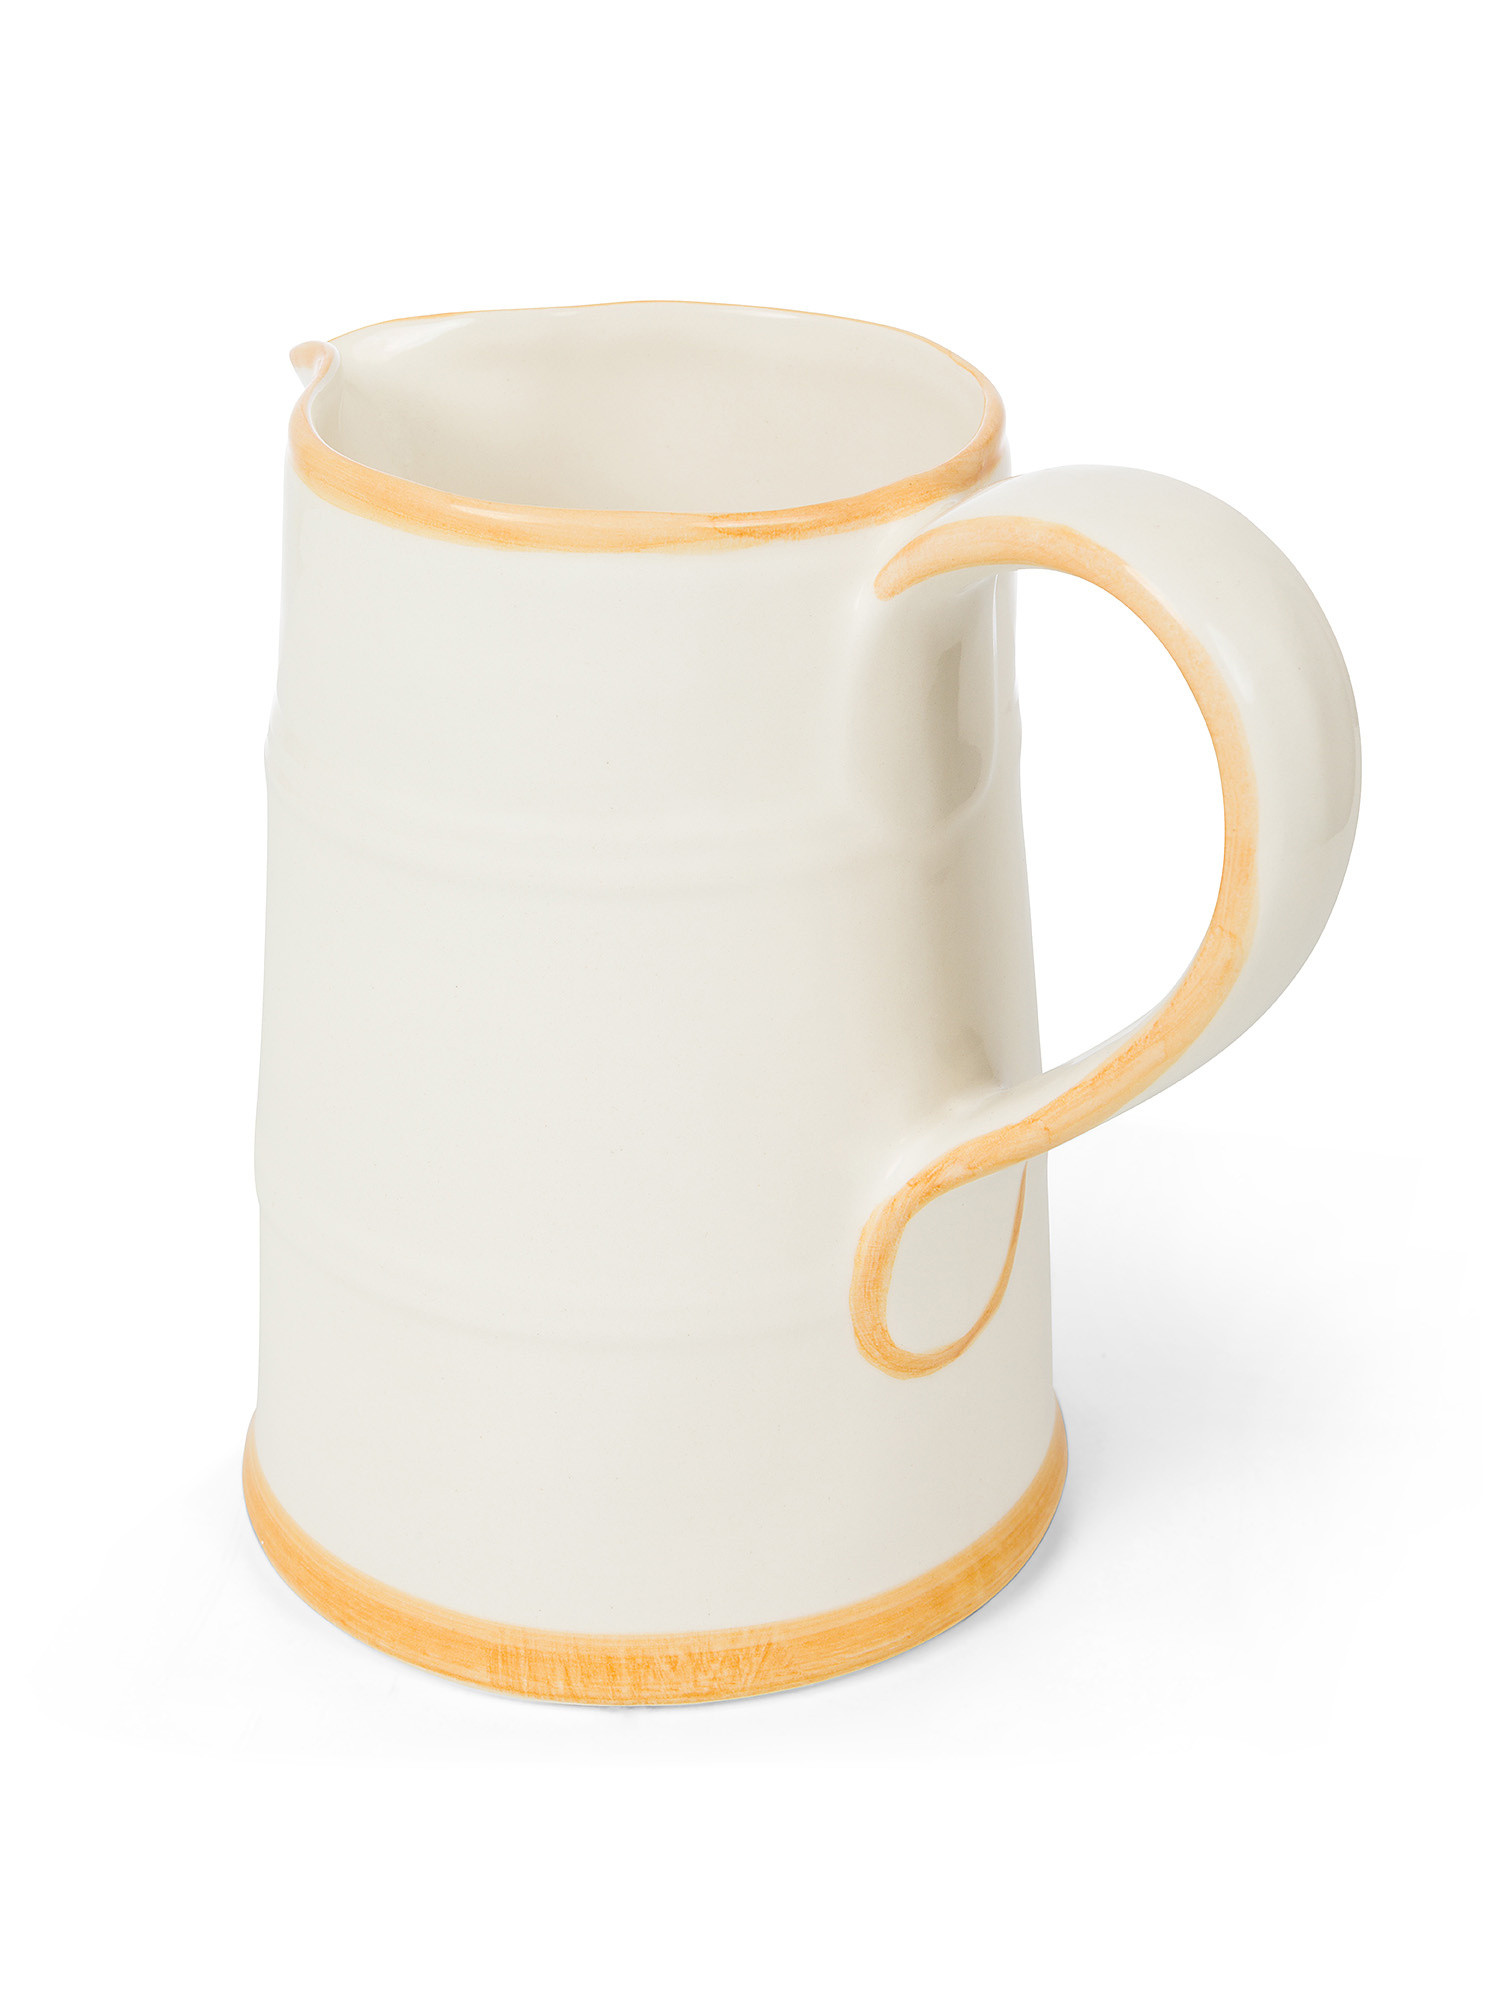 Ceramic jug with colored edge, White, large image number 1